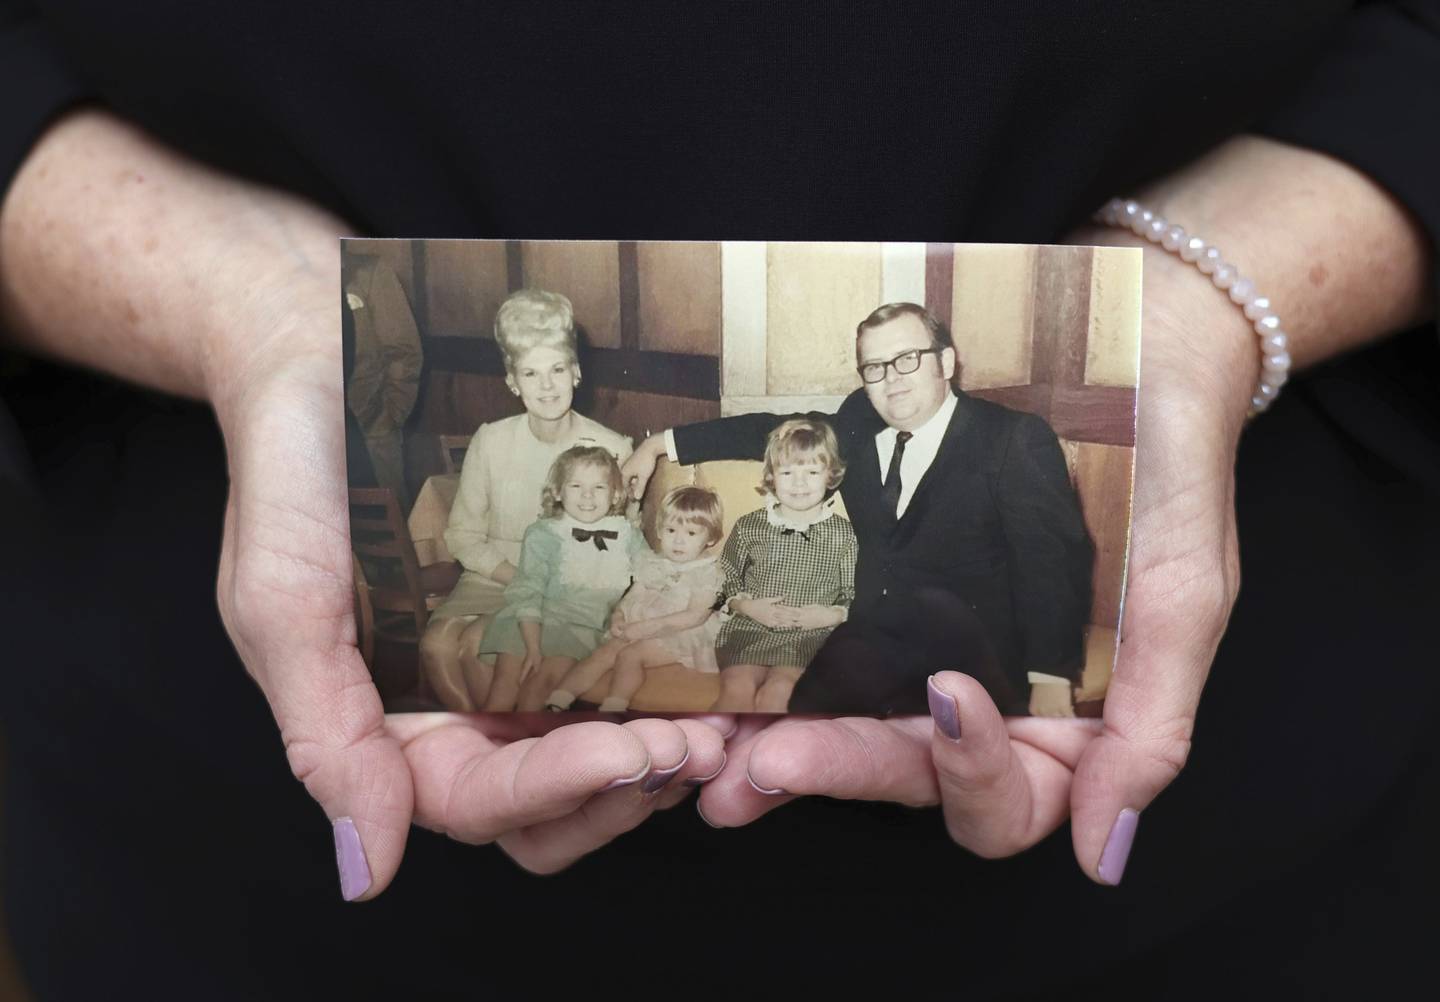 Laurie Edling holds a family photo from 1968 showing her parents, Loretta and John Stanisha, along with their three children: Therese, 6, Laurie, 2, and Susan, 7.